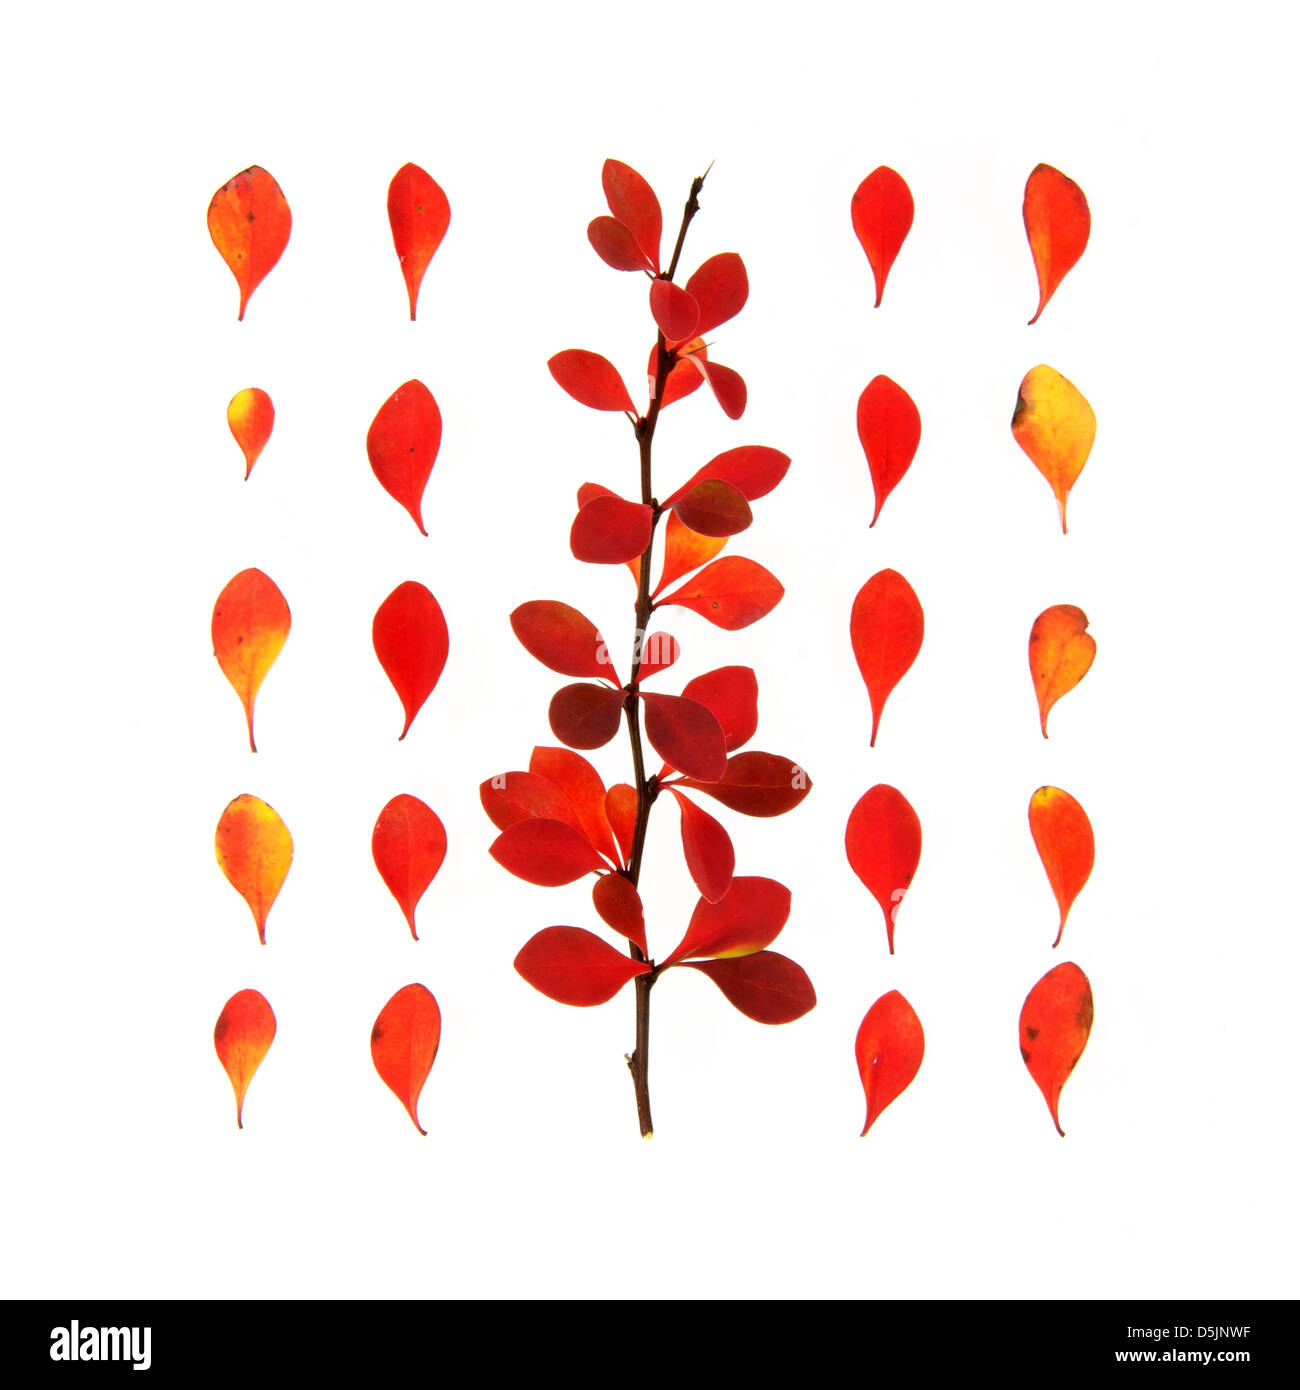 Bright red and yellow barberry twig and leaves on white background: fall foliage, Bar Harbor, Maine Stock Photo